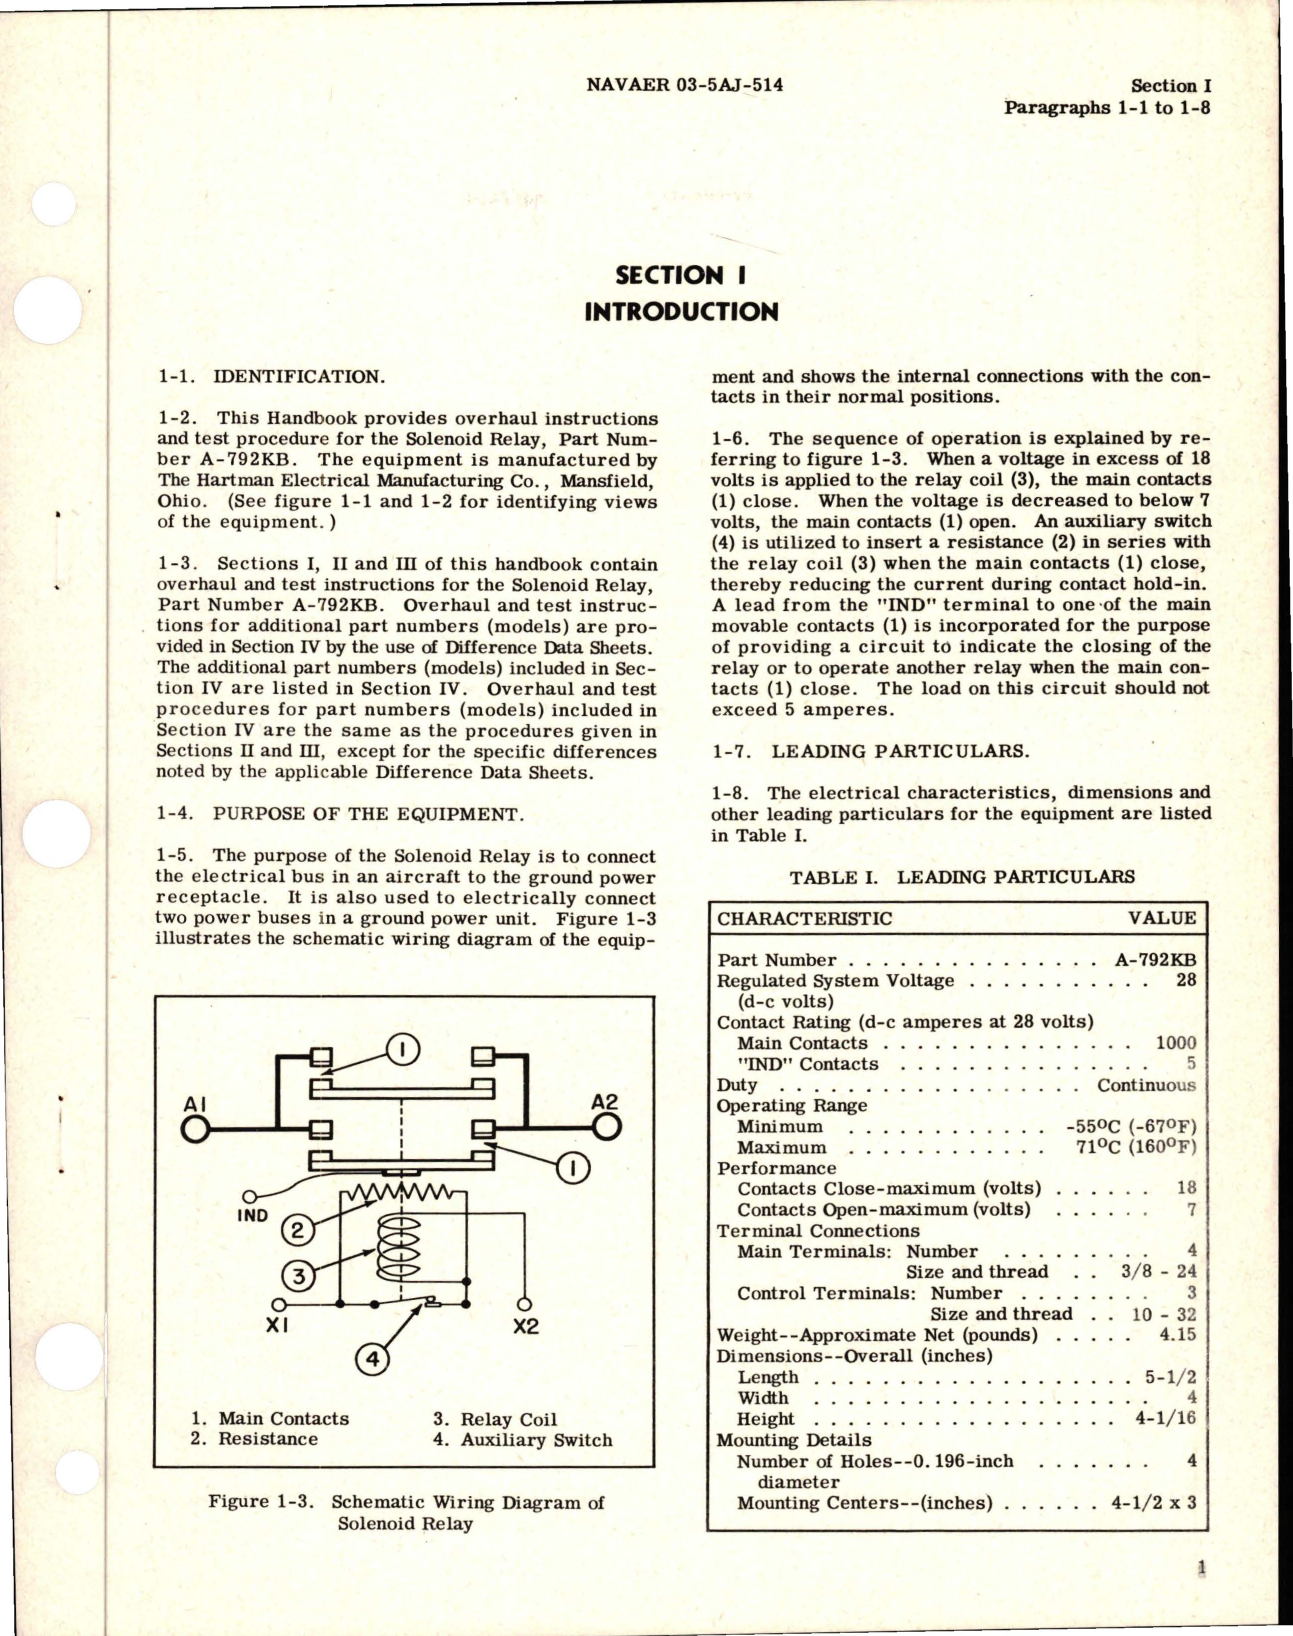 Sample page 5 from AirCorps Library document: Overhaul Instructions for Solenoid Relay - Parts A-792 and A-792KB